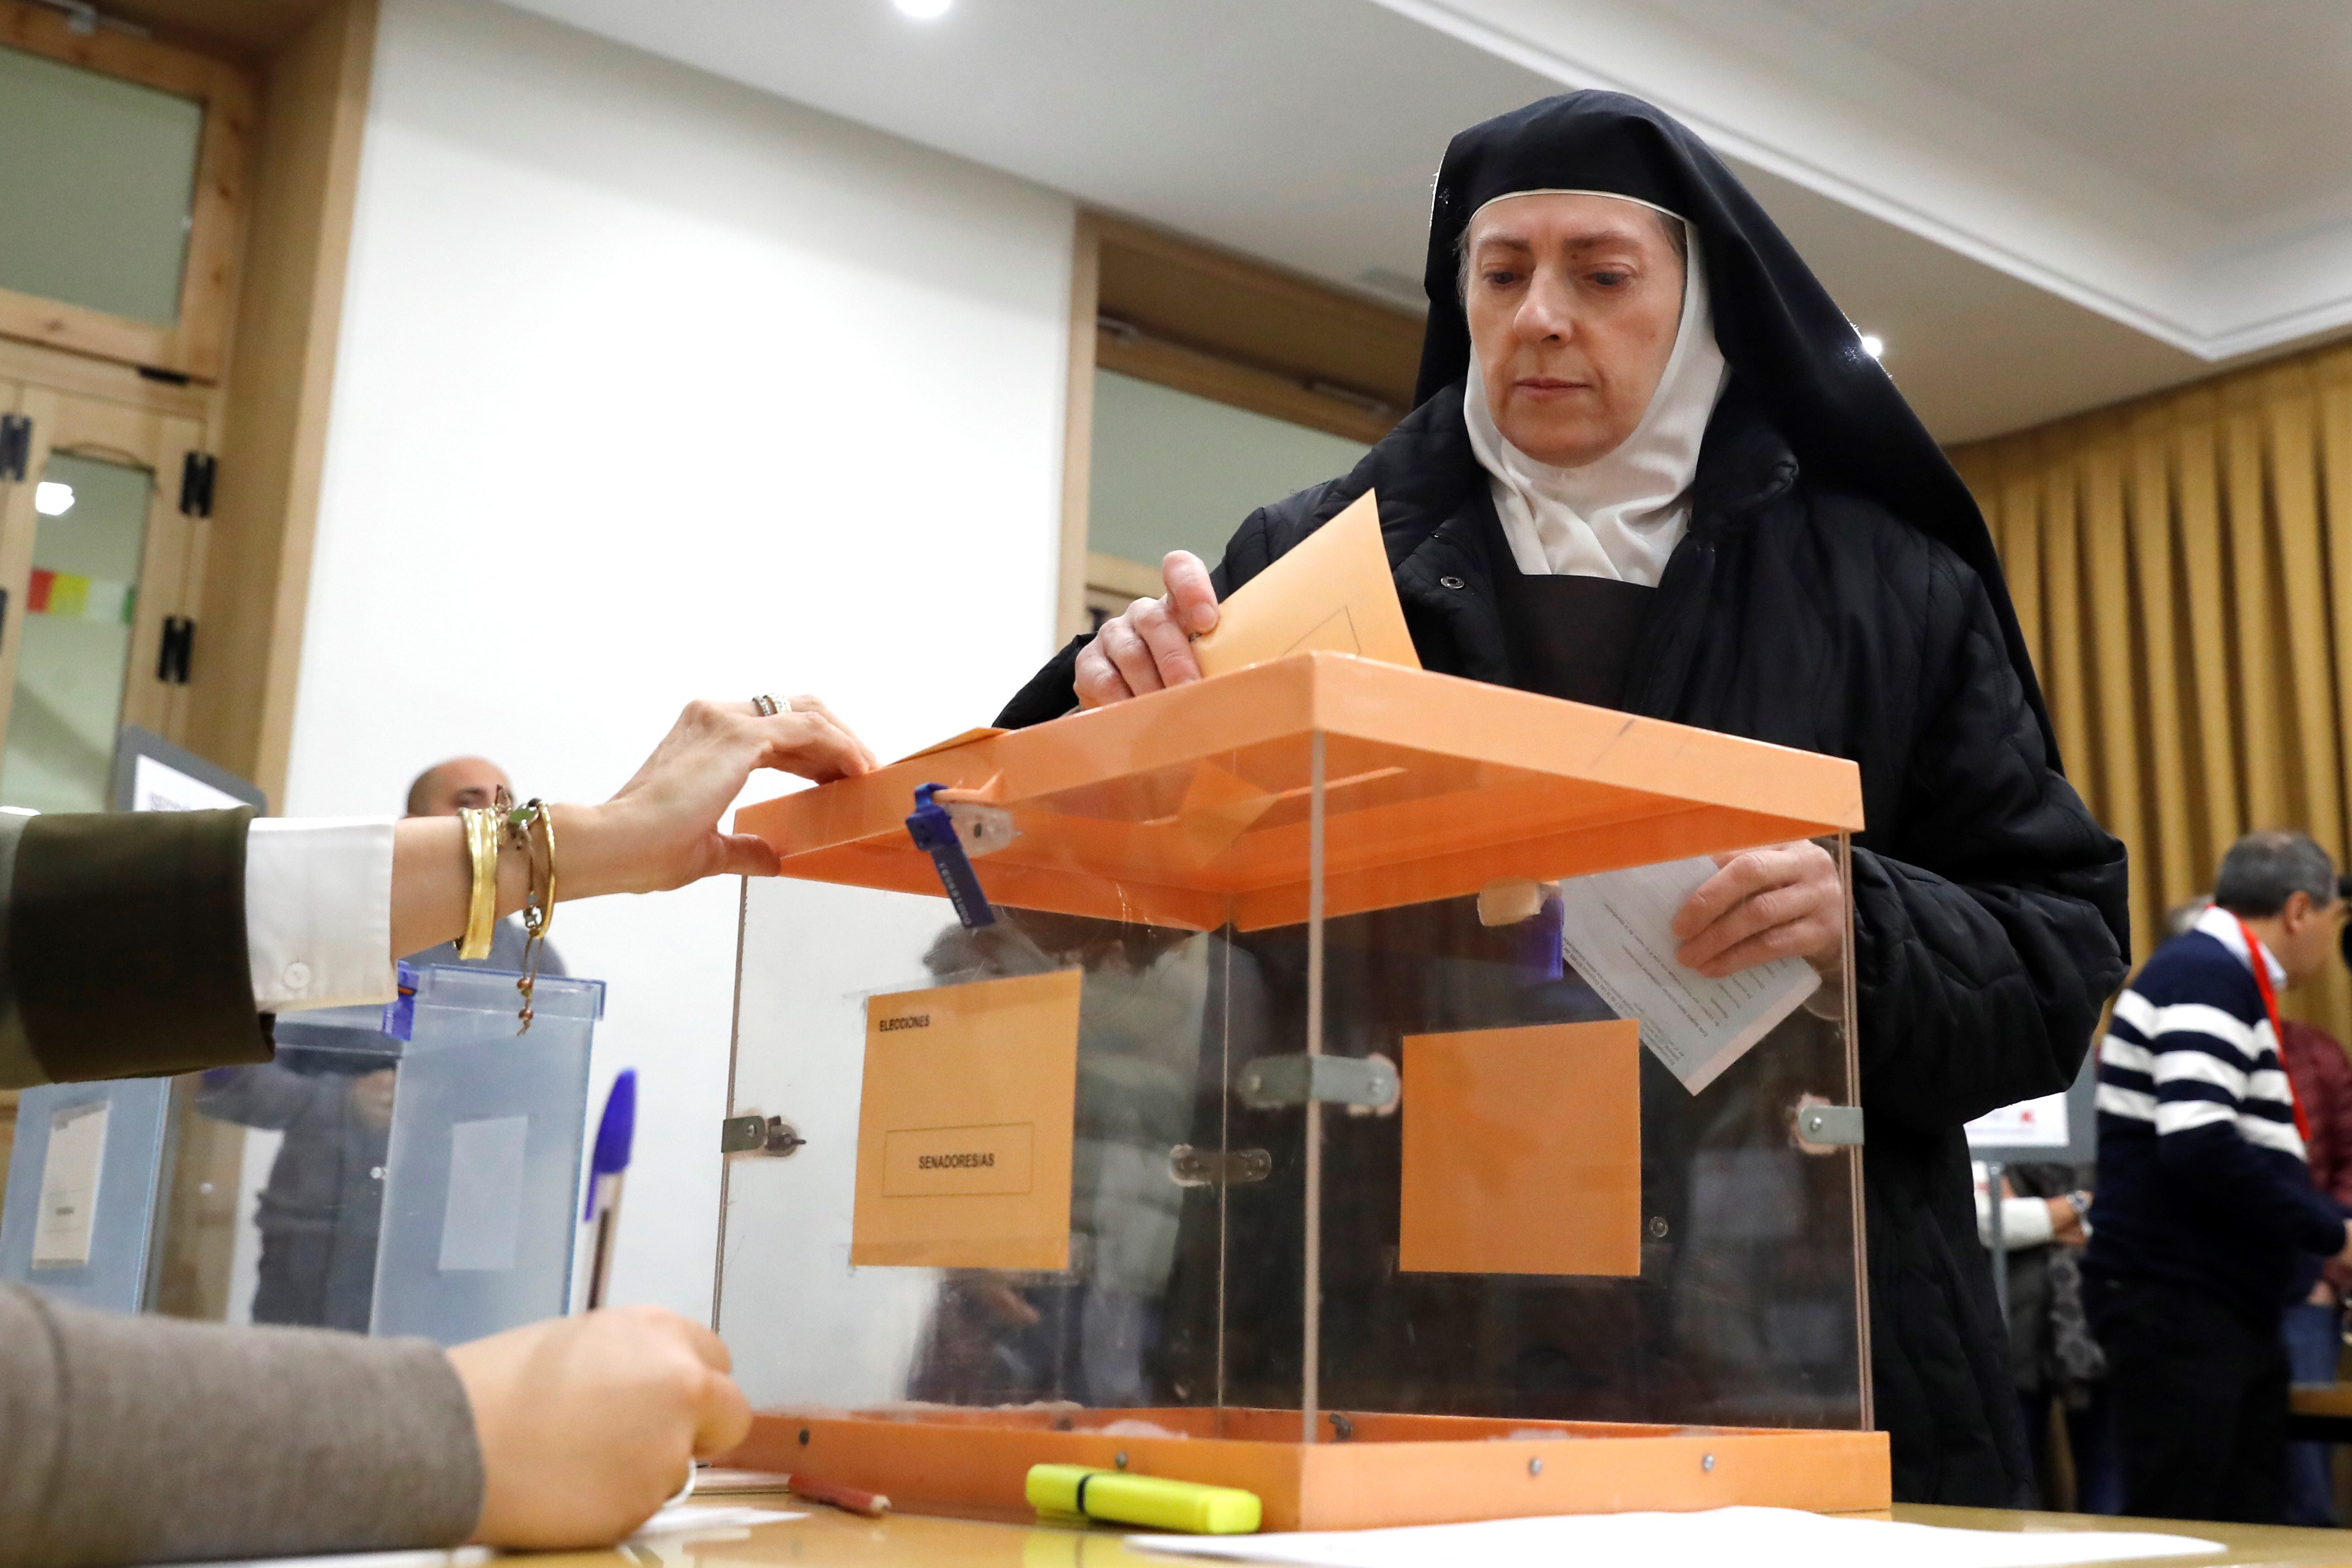 epa07985346 A nun votes at a polling station in Madrid, Spain, 10 November 2019. Spain holds general elections after Spanish socialist Primer Minister Pedro Sanchez failed to form government following 28 April elections.  EPA/BALLESTEROS